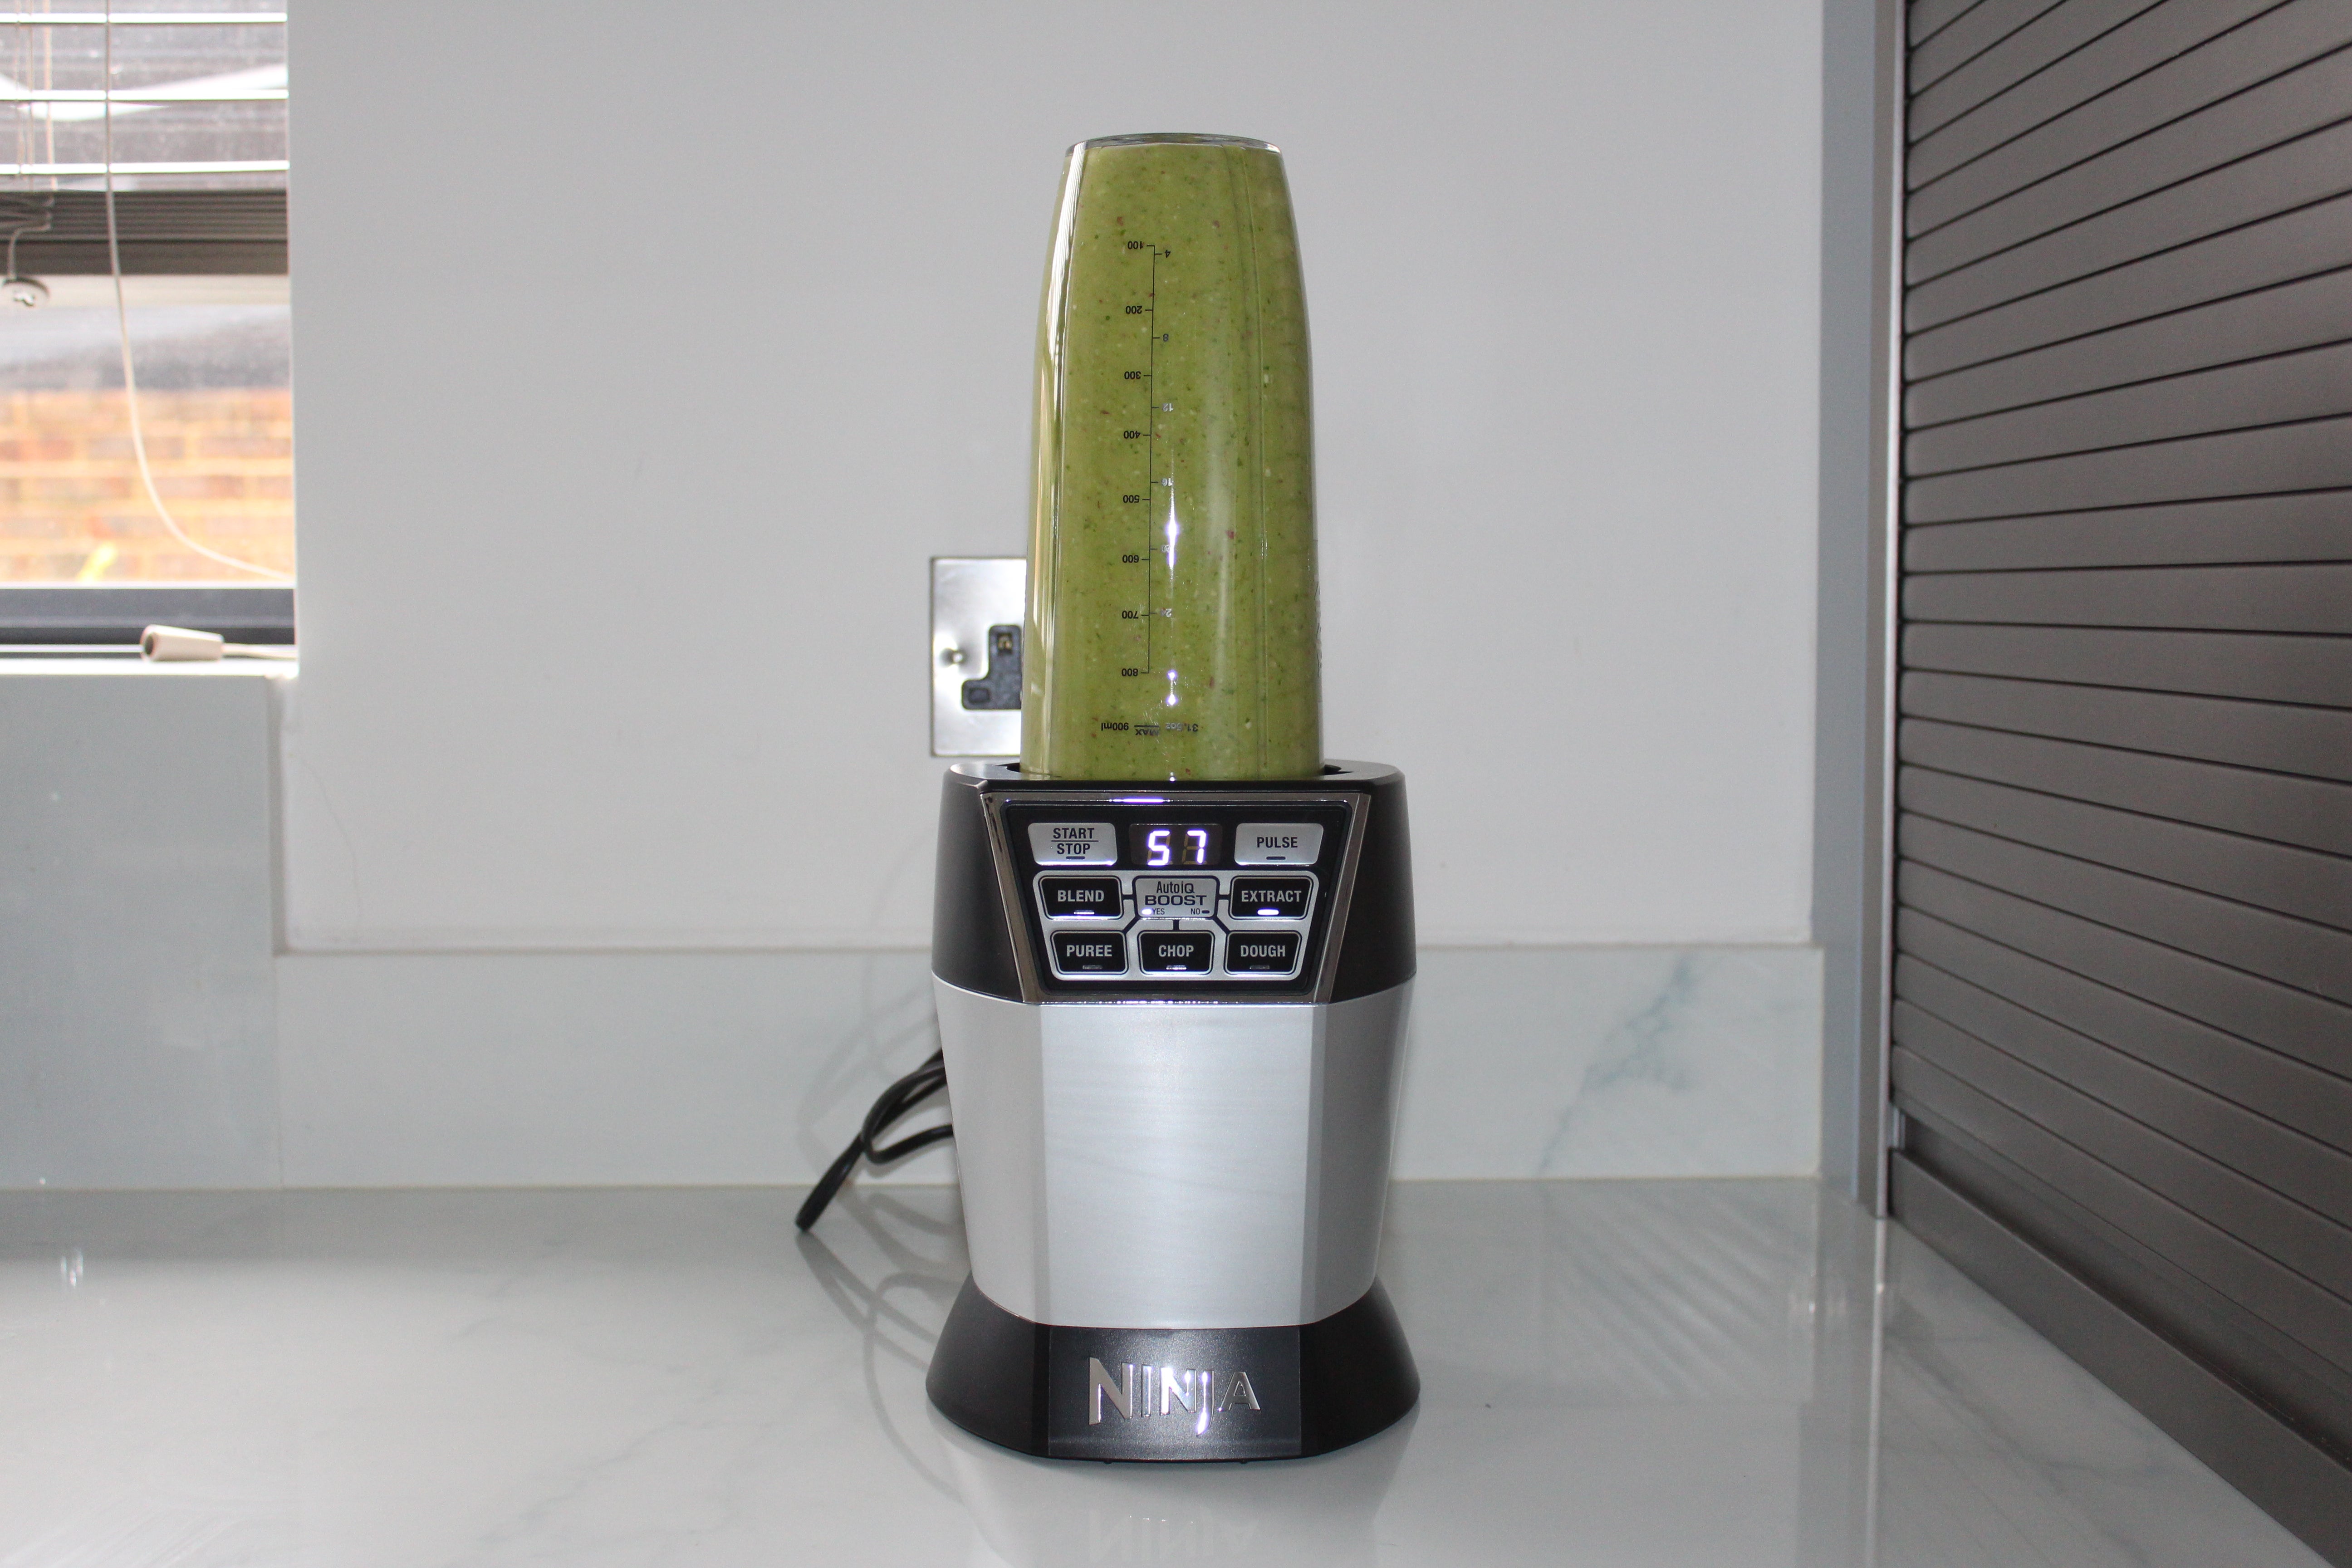 Ninja Ultimate Chopper with green smoothie on kitchen counter.